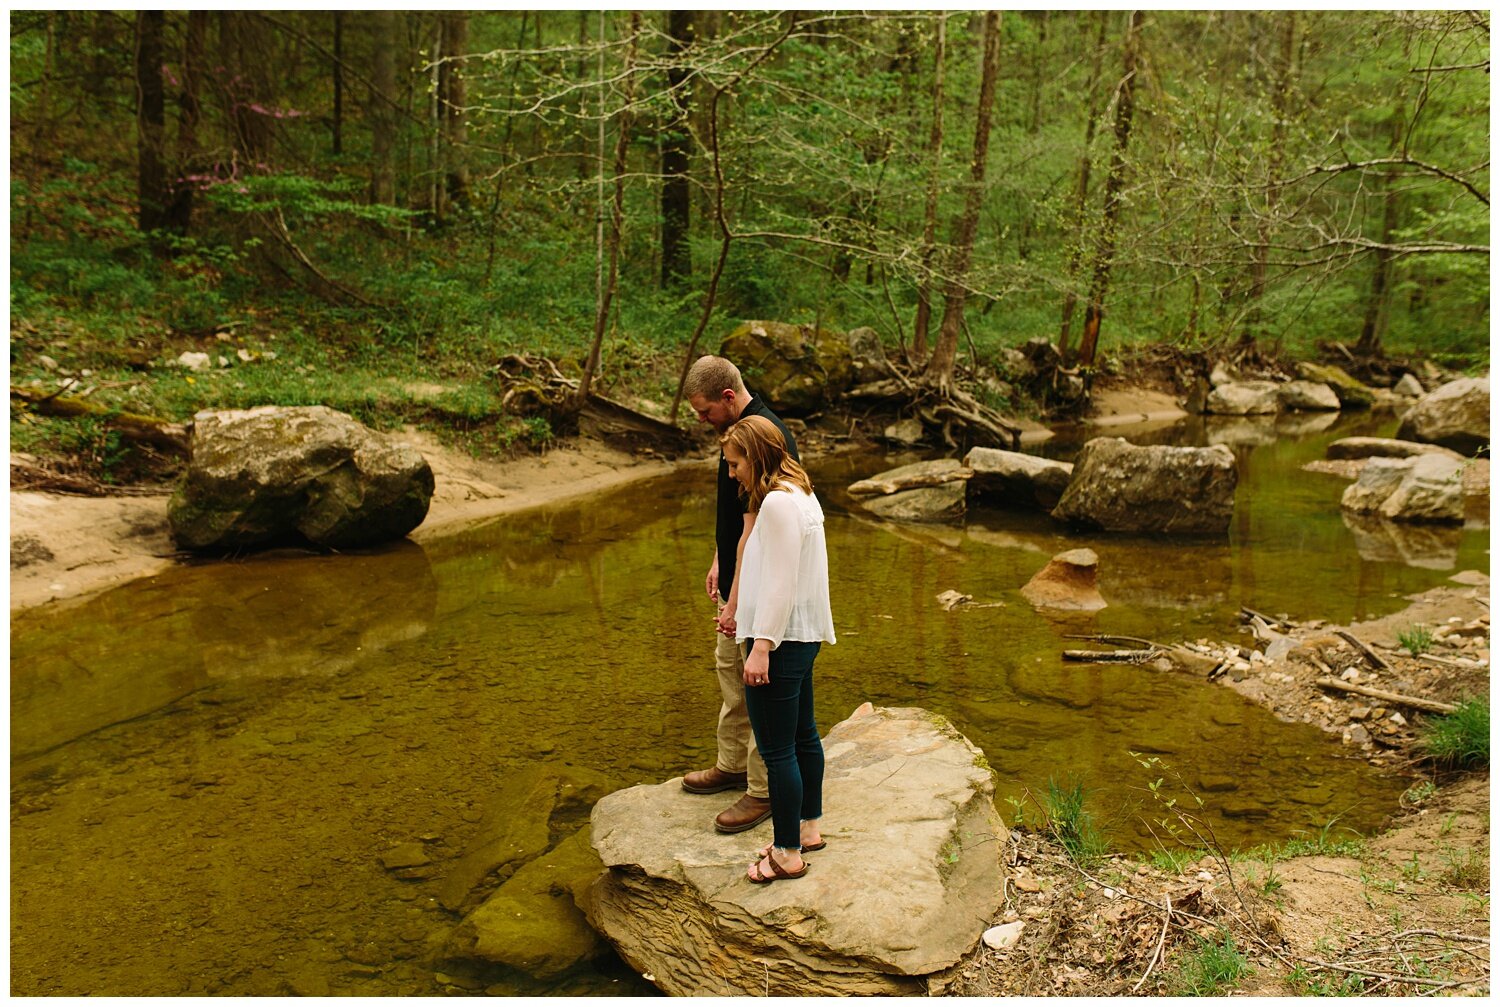 Kendra_Farris_Photography_Red_River_Gorge_Engagement_Photos-32.jpg